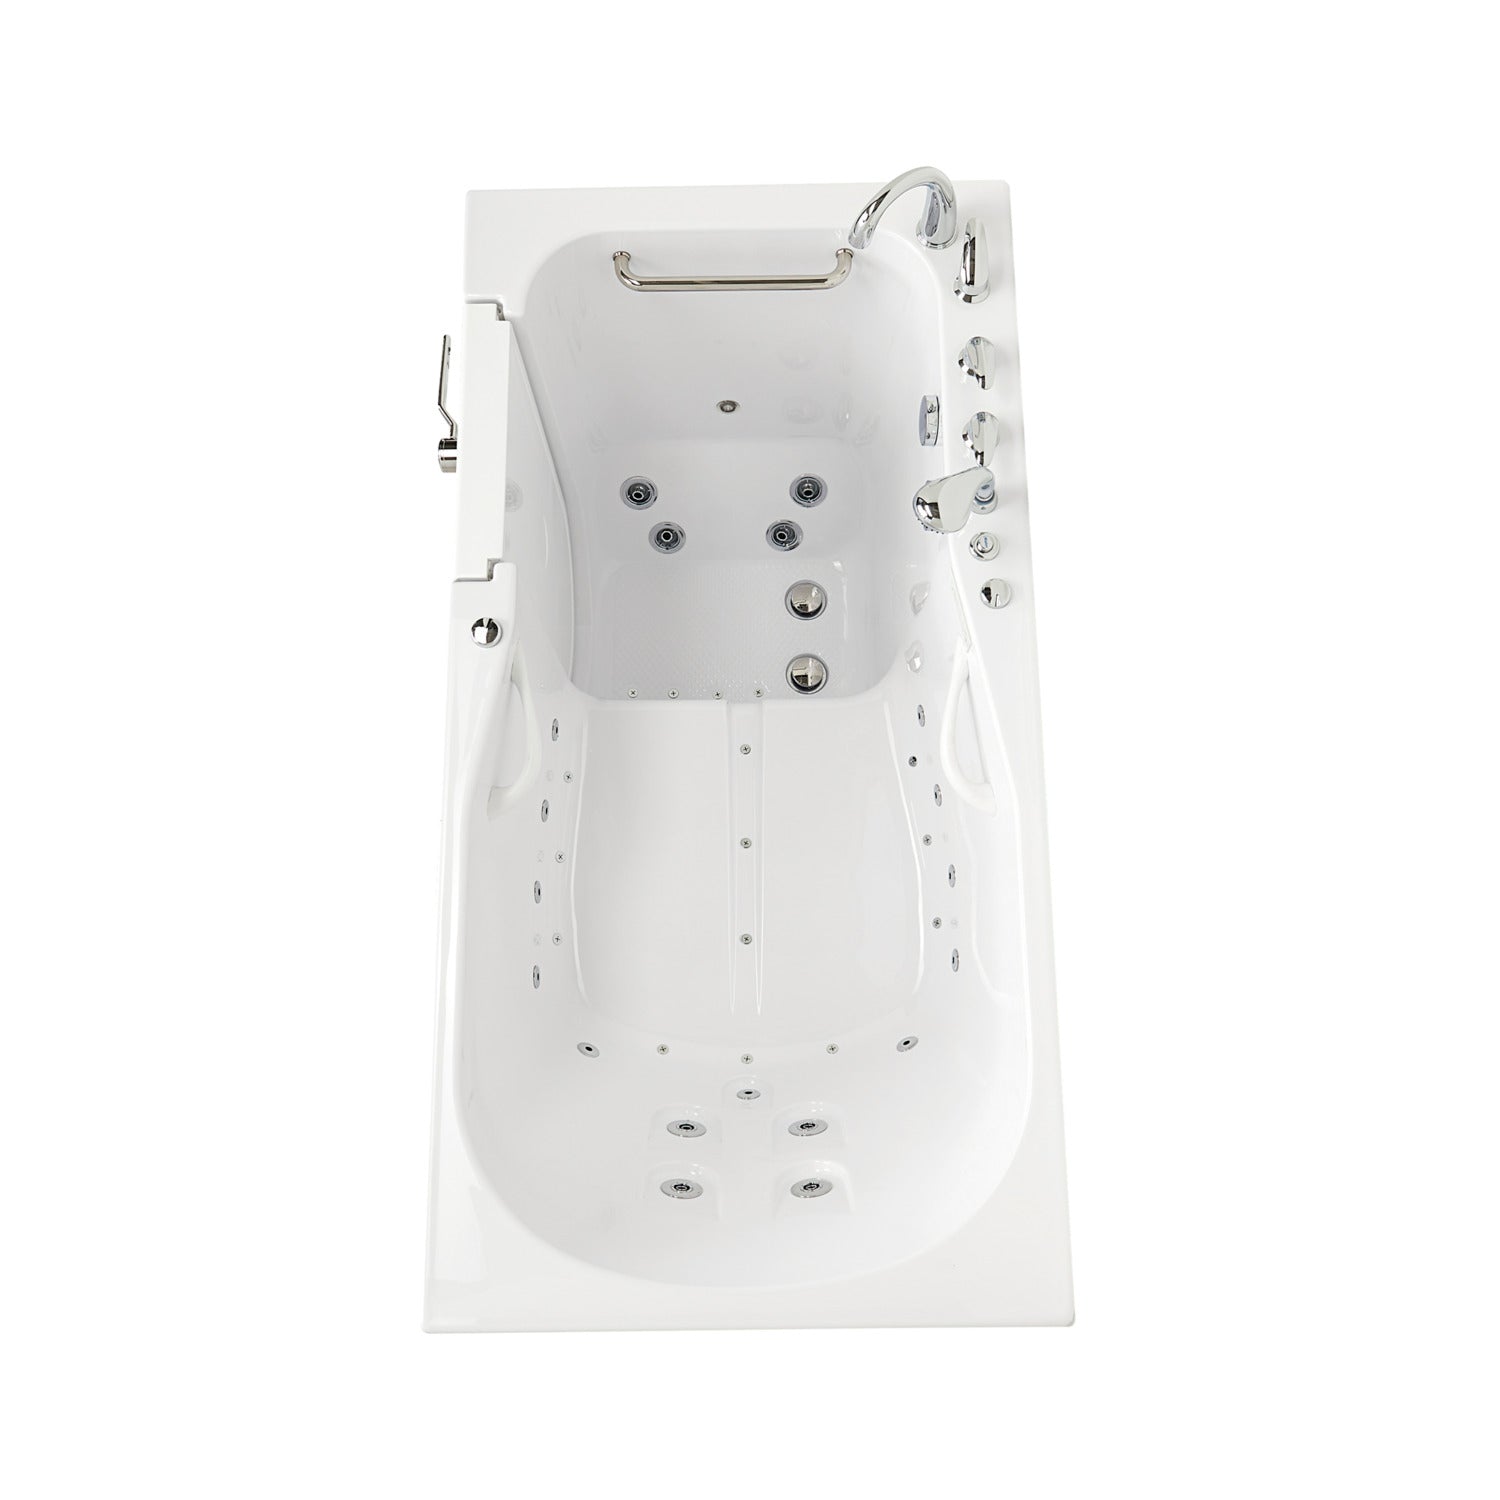 Ella S Bubbles Shak Model 36 X72 Acrylic Air And Hydro Massage With Independent Foot Massage